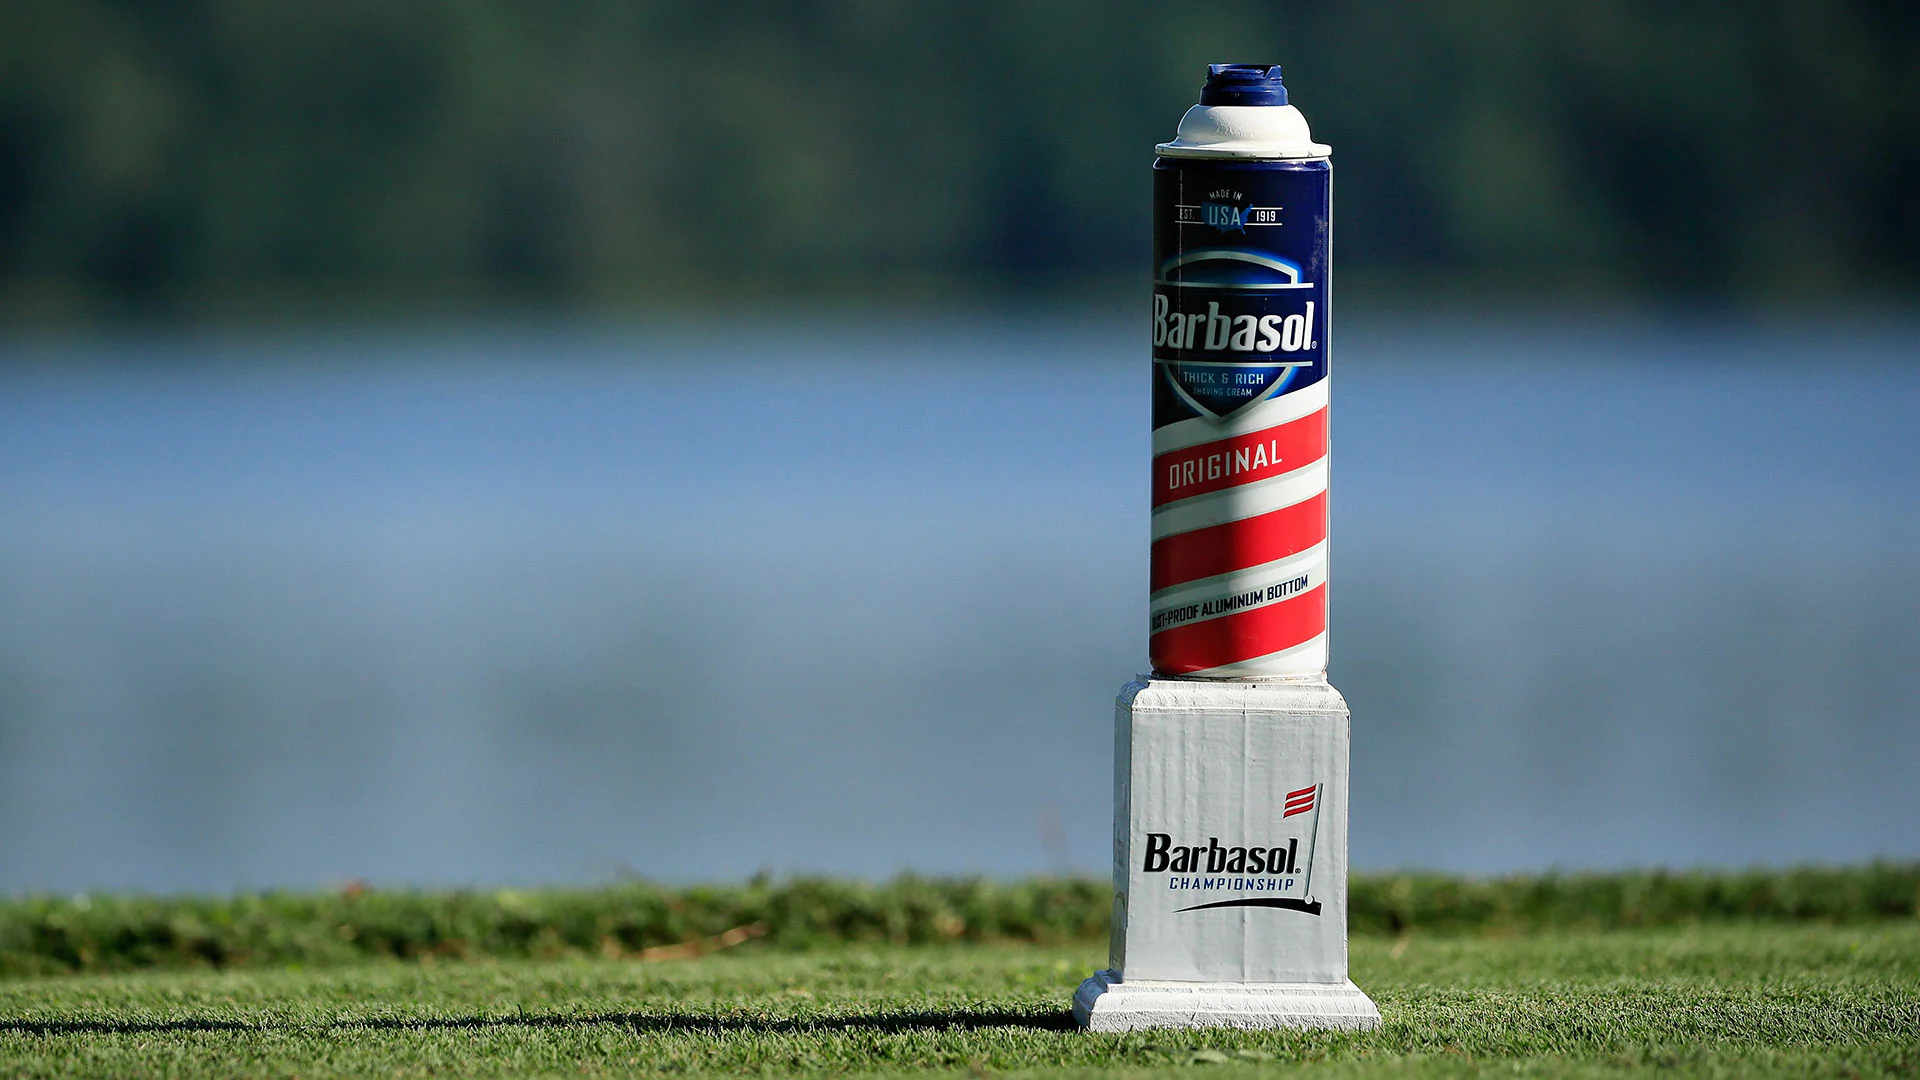 Barbasol Championship moving to Kentucky in 2018